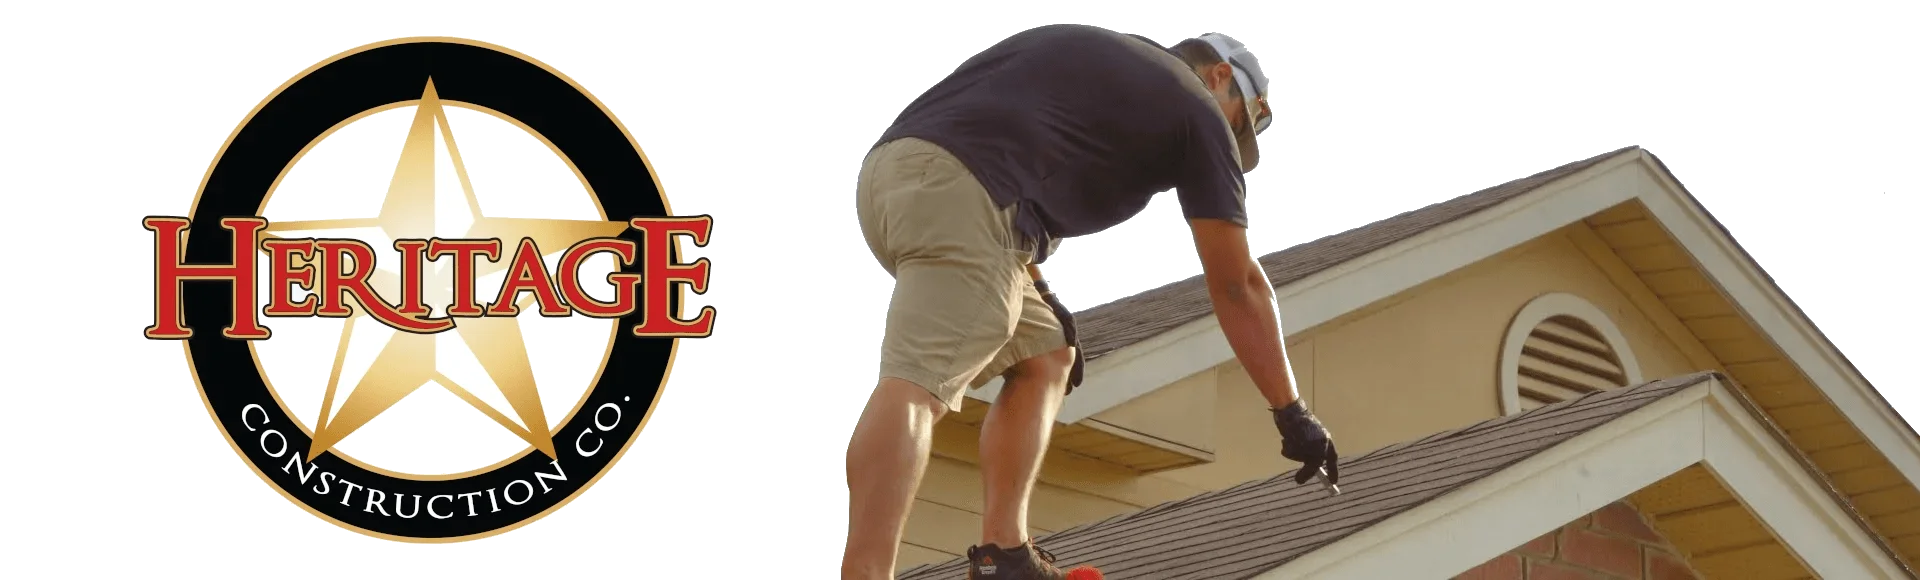 Roofing Services: Residential and Commercial Roofing - Heritage Construction Co.